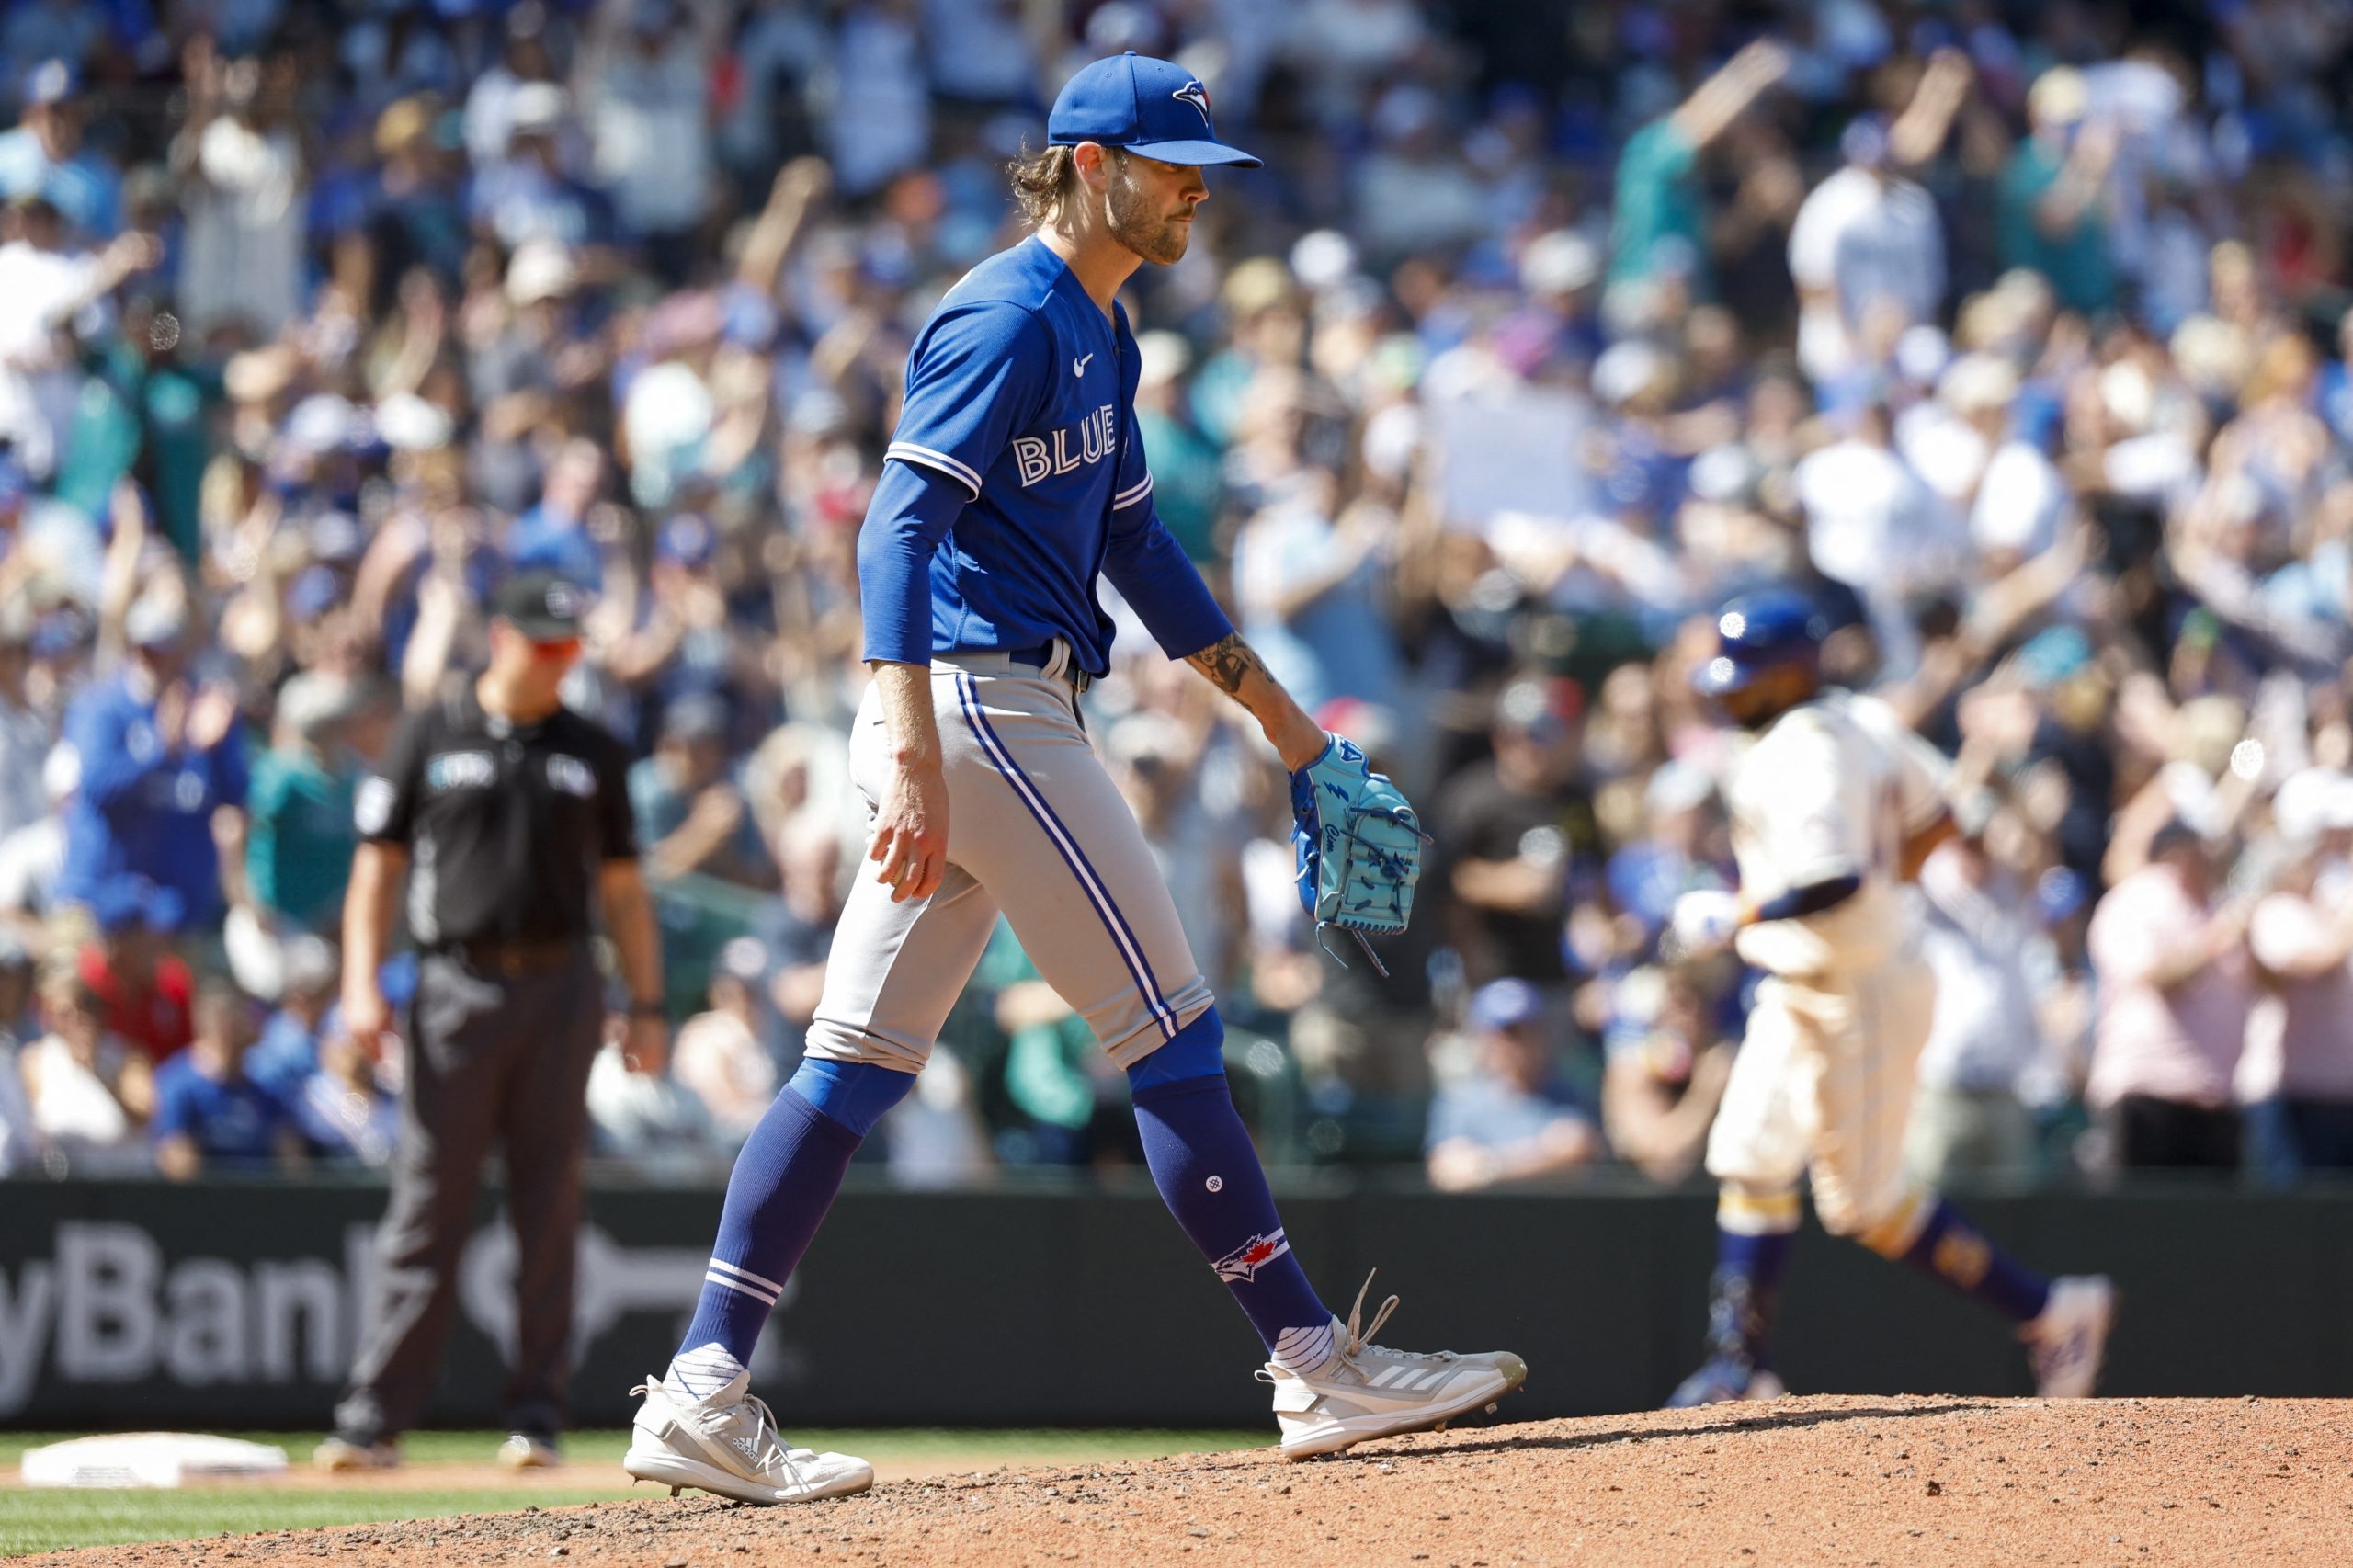 Mariners quiet down Blue Jays fans in a hurry with big first inning